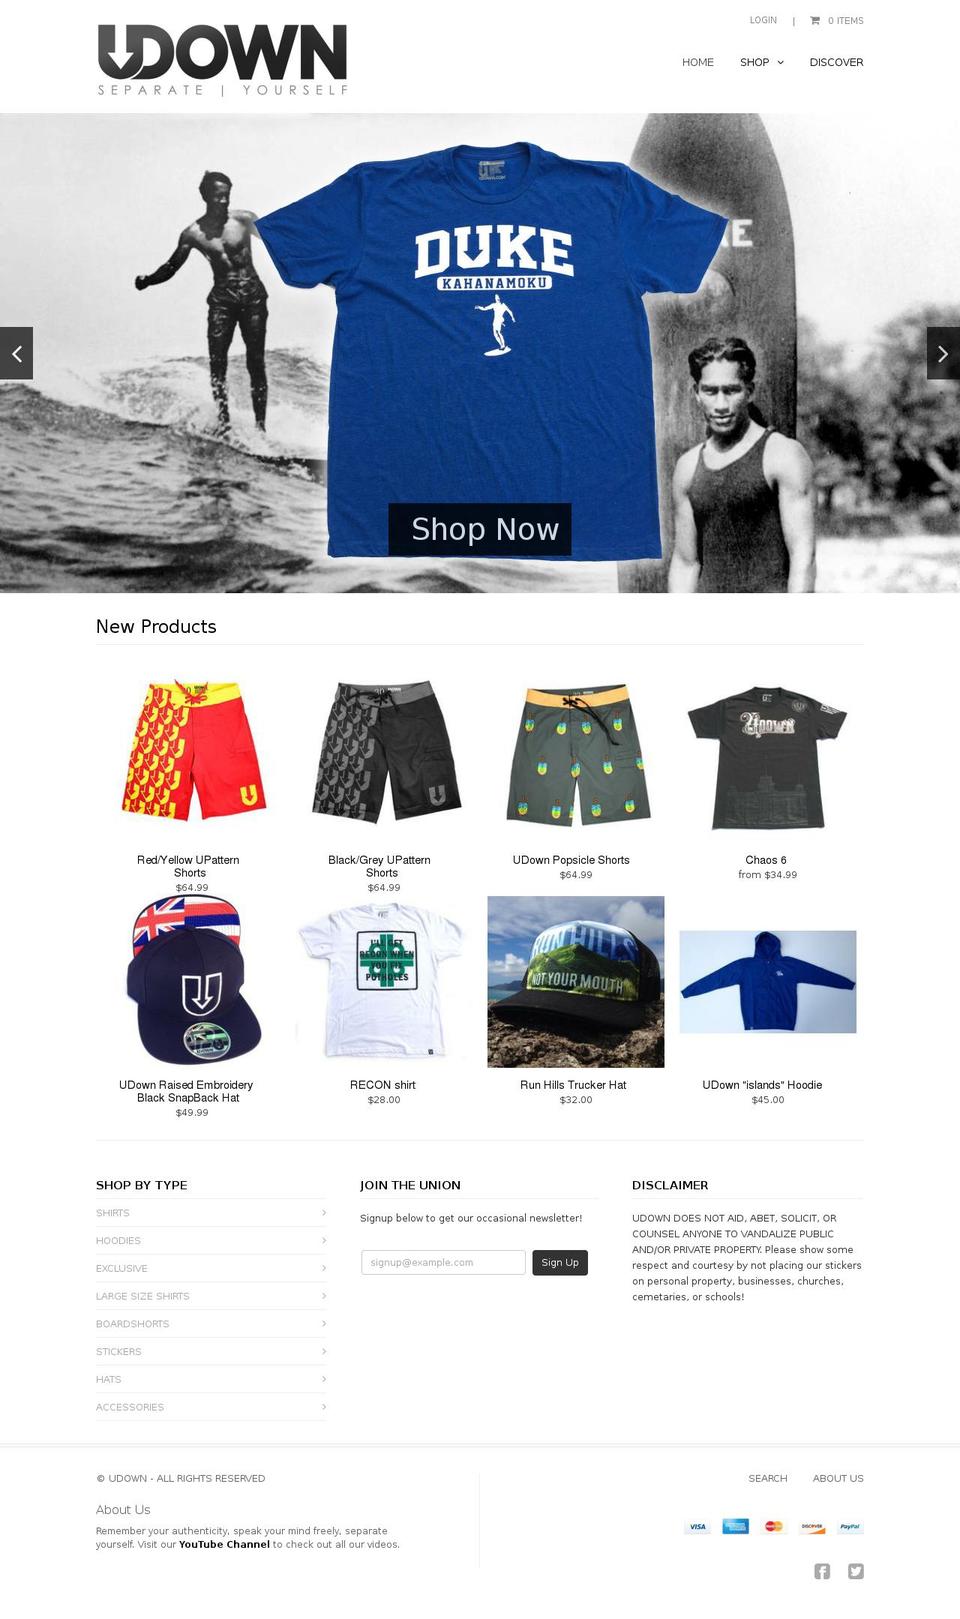 limitless Shopify theme site example u-down.com